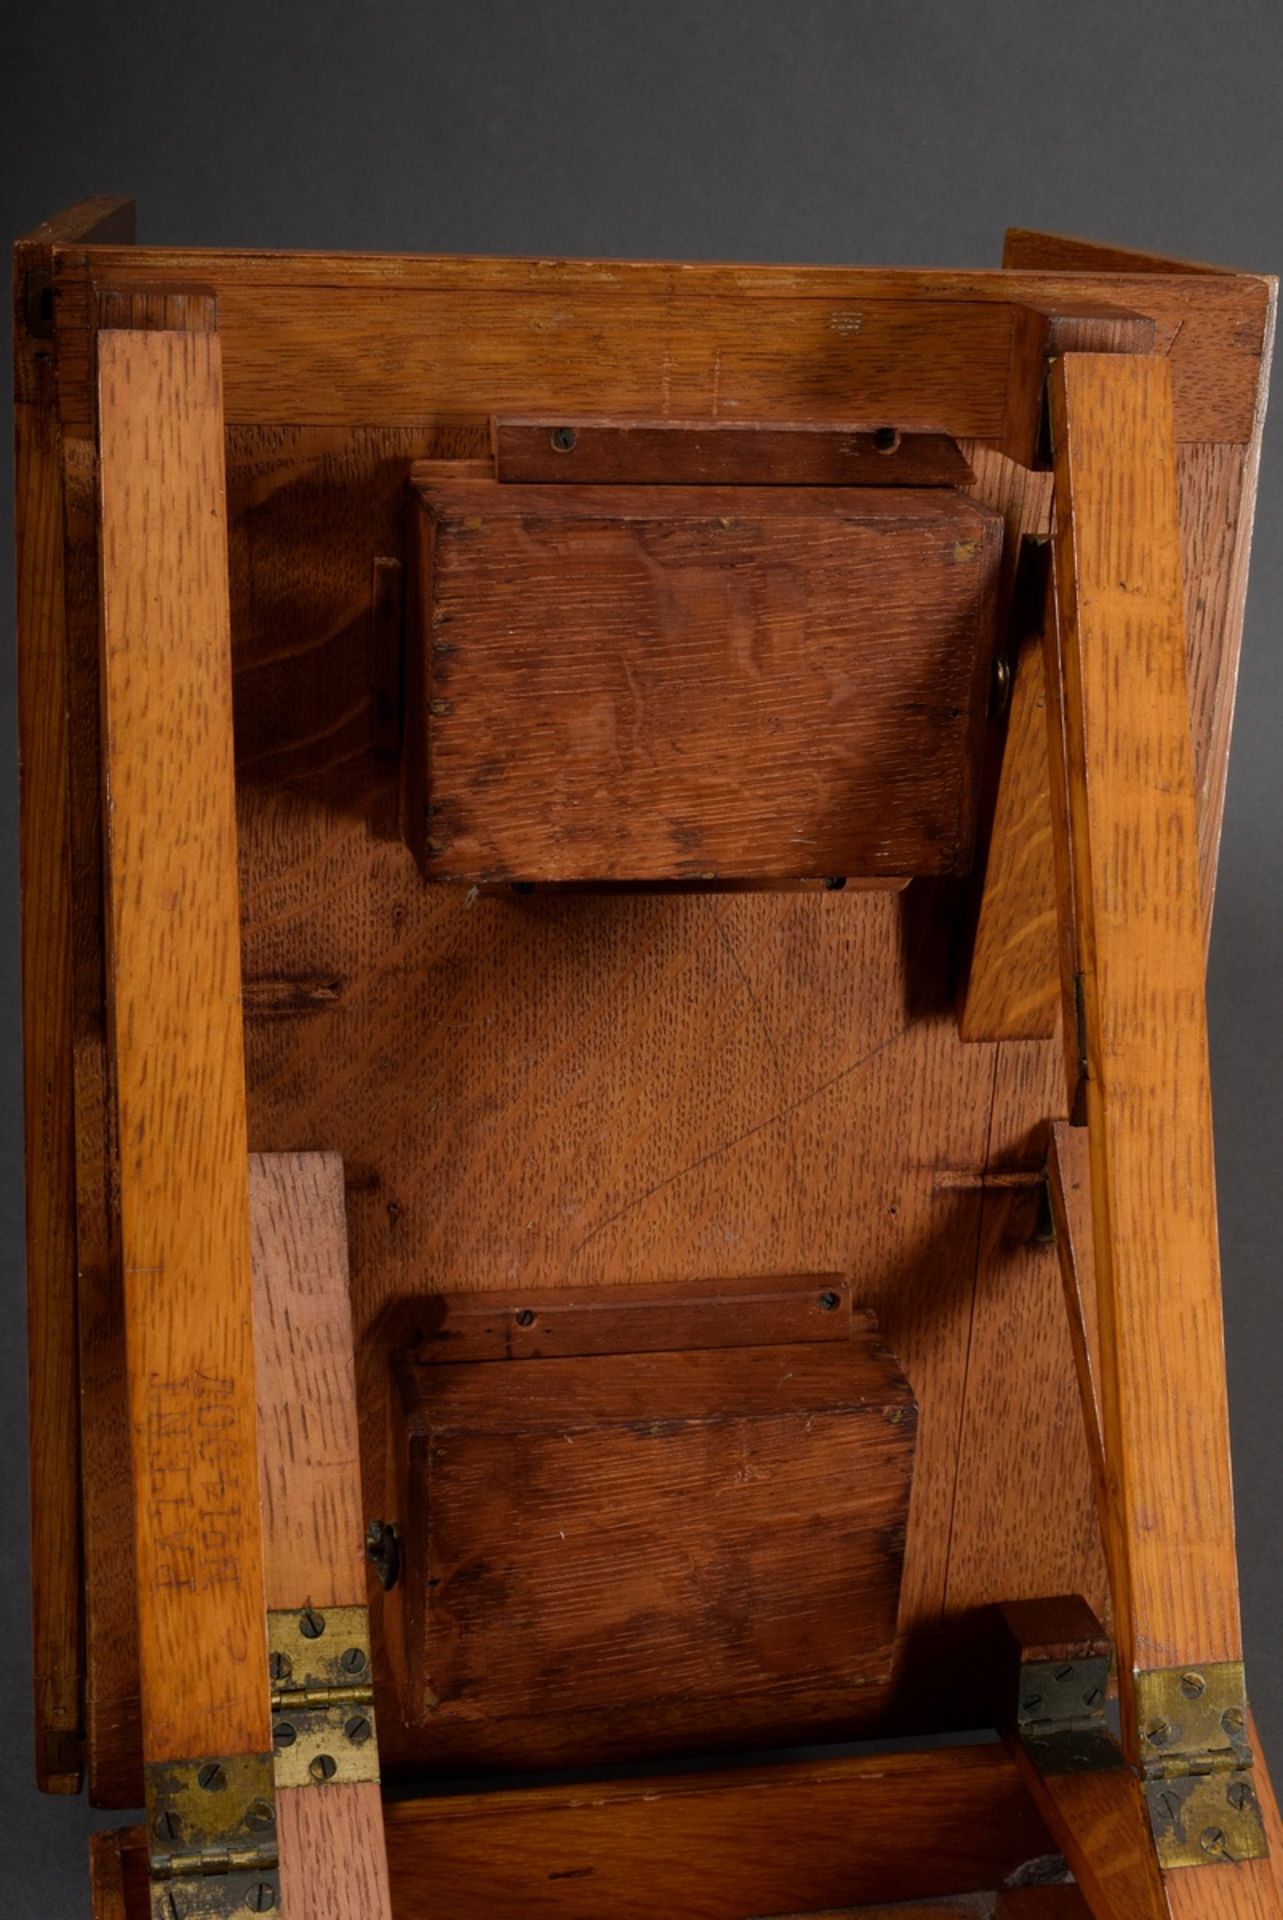 Travel patent table with green felt tops and two drawers, wood, foldable, num. "Patent Nr. 14097",  - Image 8 of 10